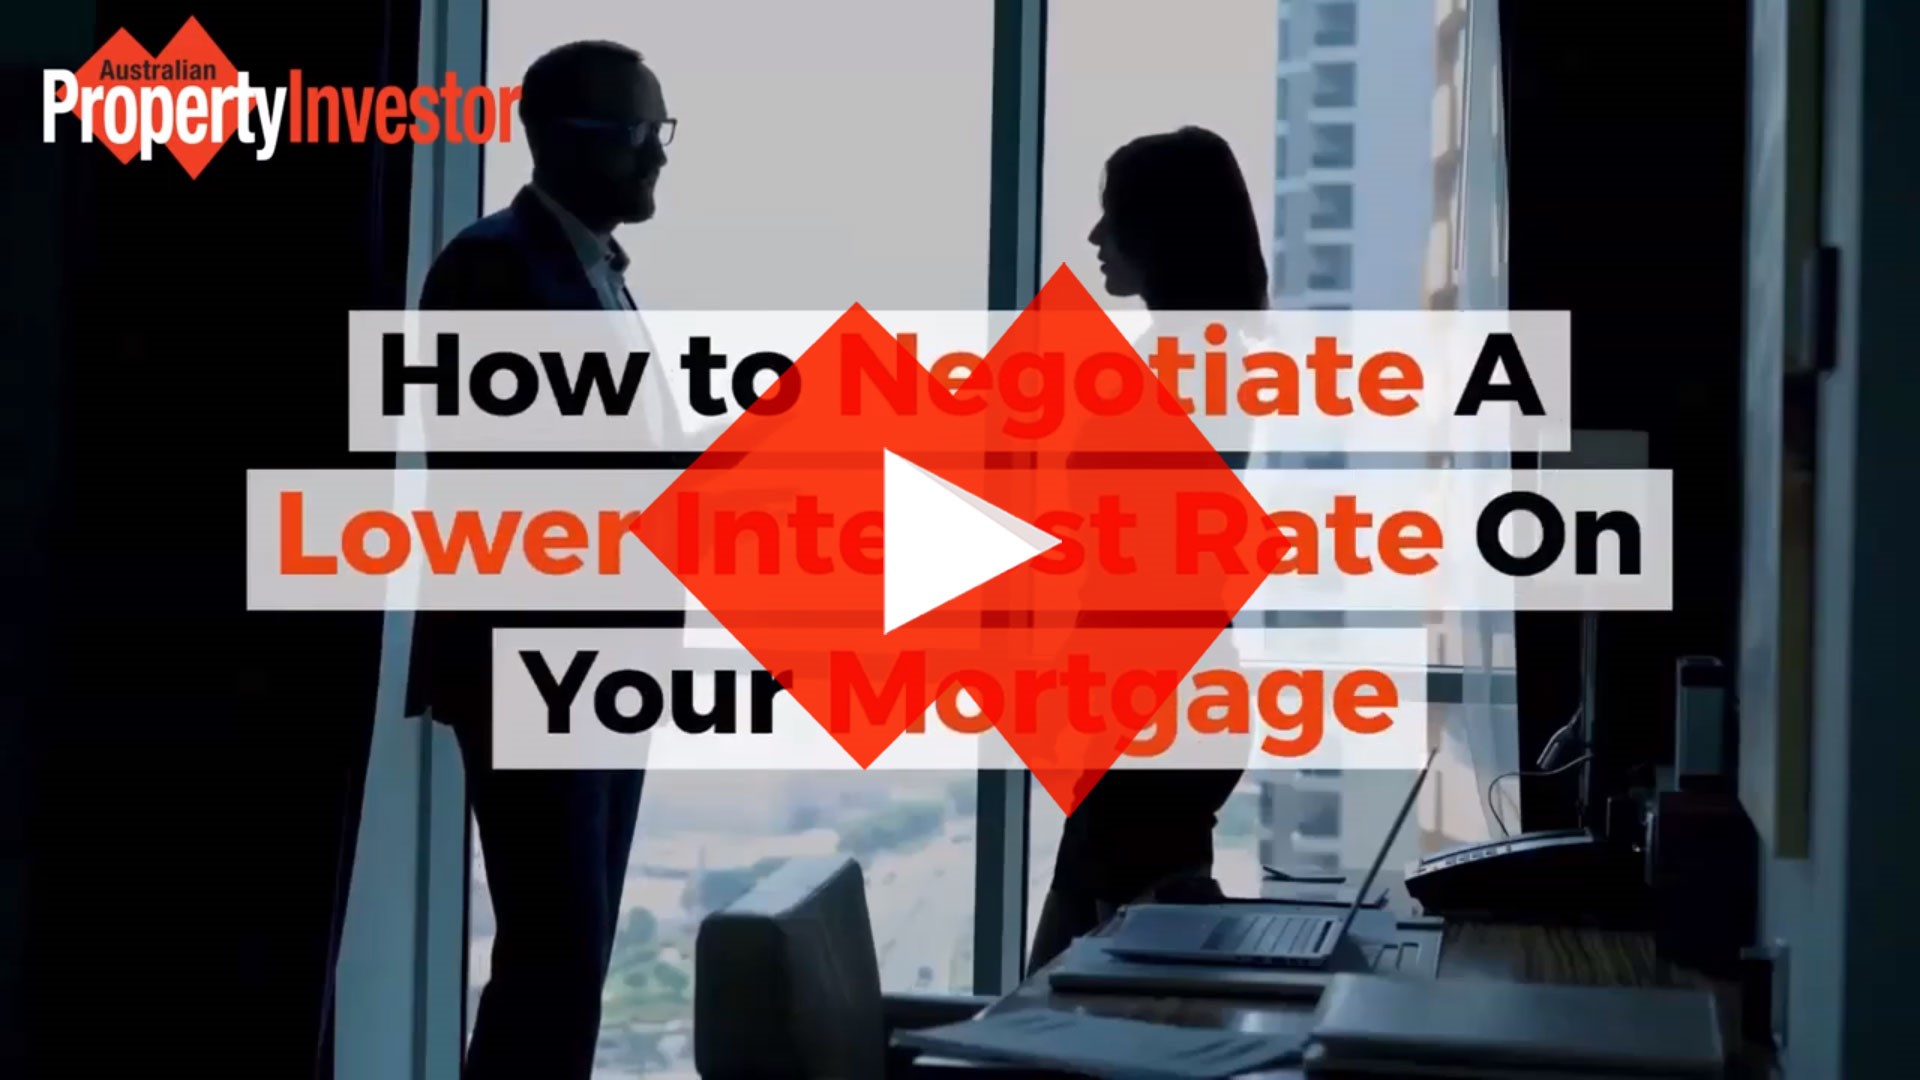 How to negotiate a better rate on your mortgage